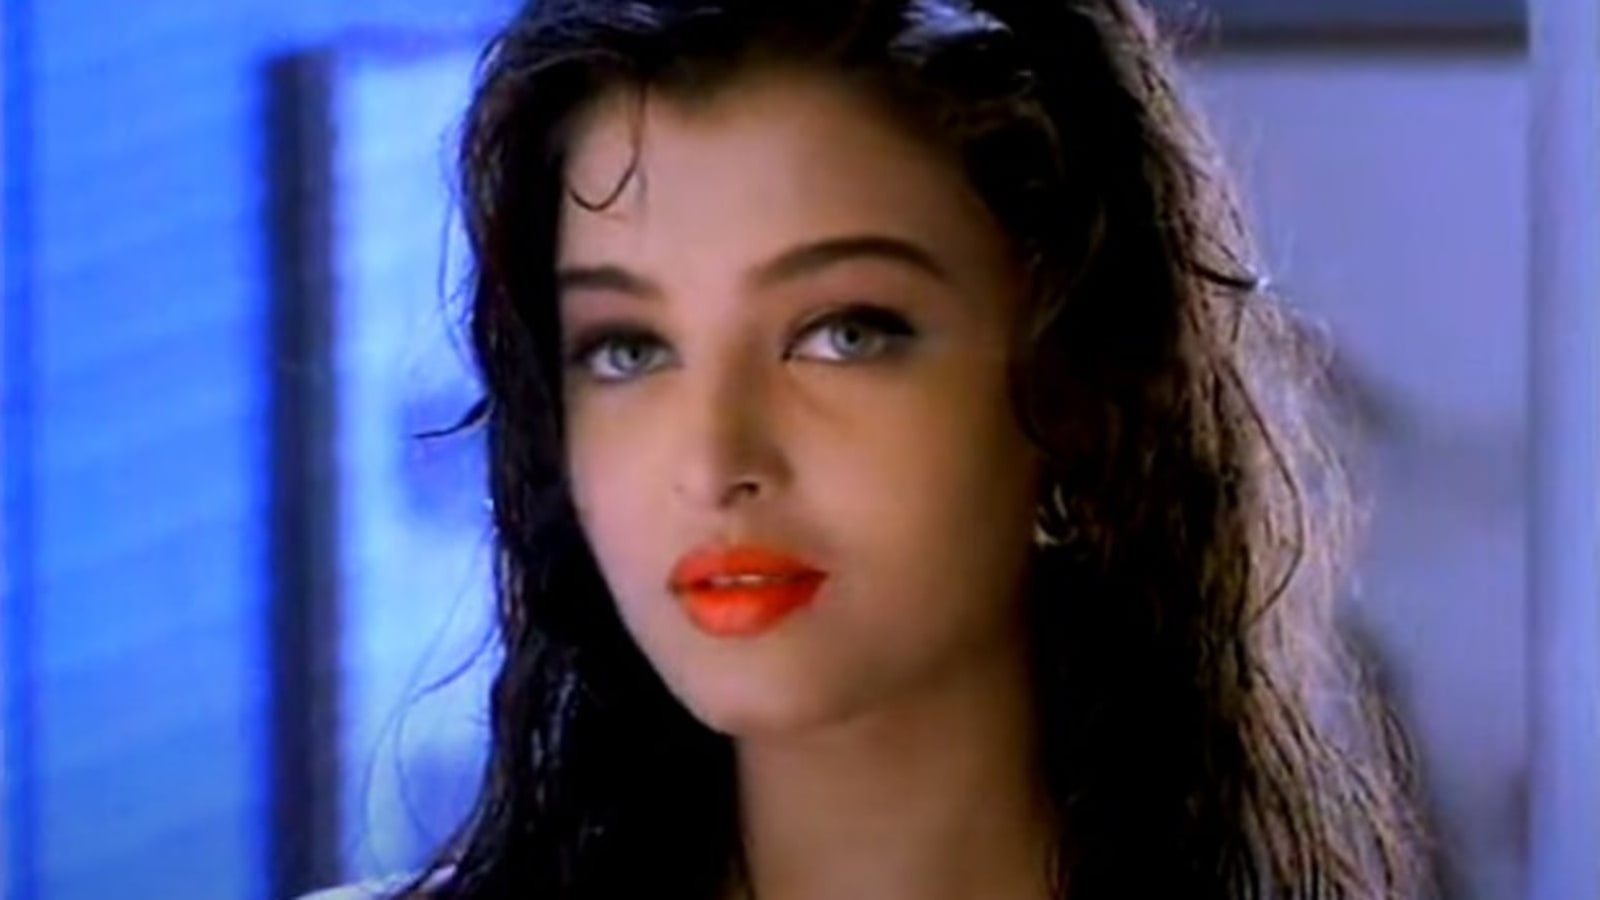 Watch this 1993 Aishwarya Rai ad that made her famous even before Miss India Bollywood